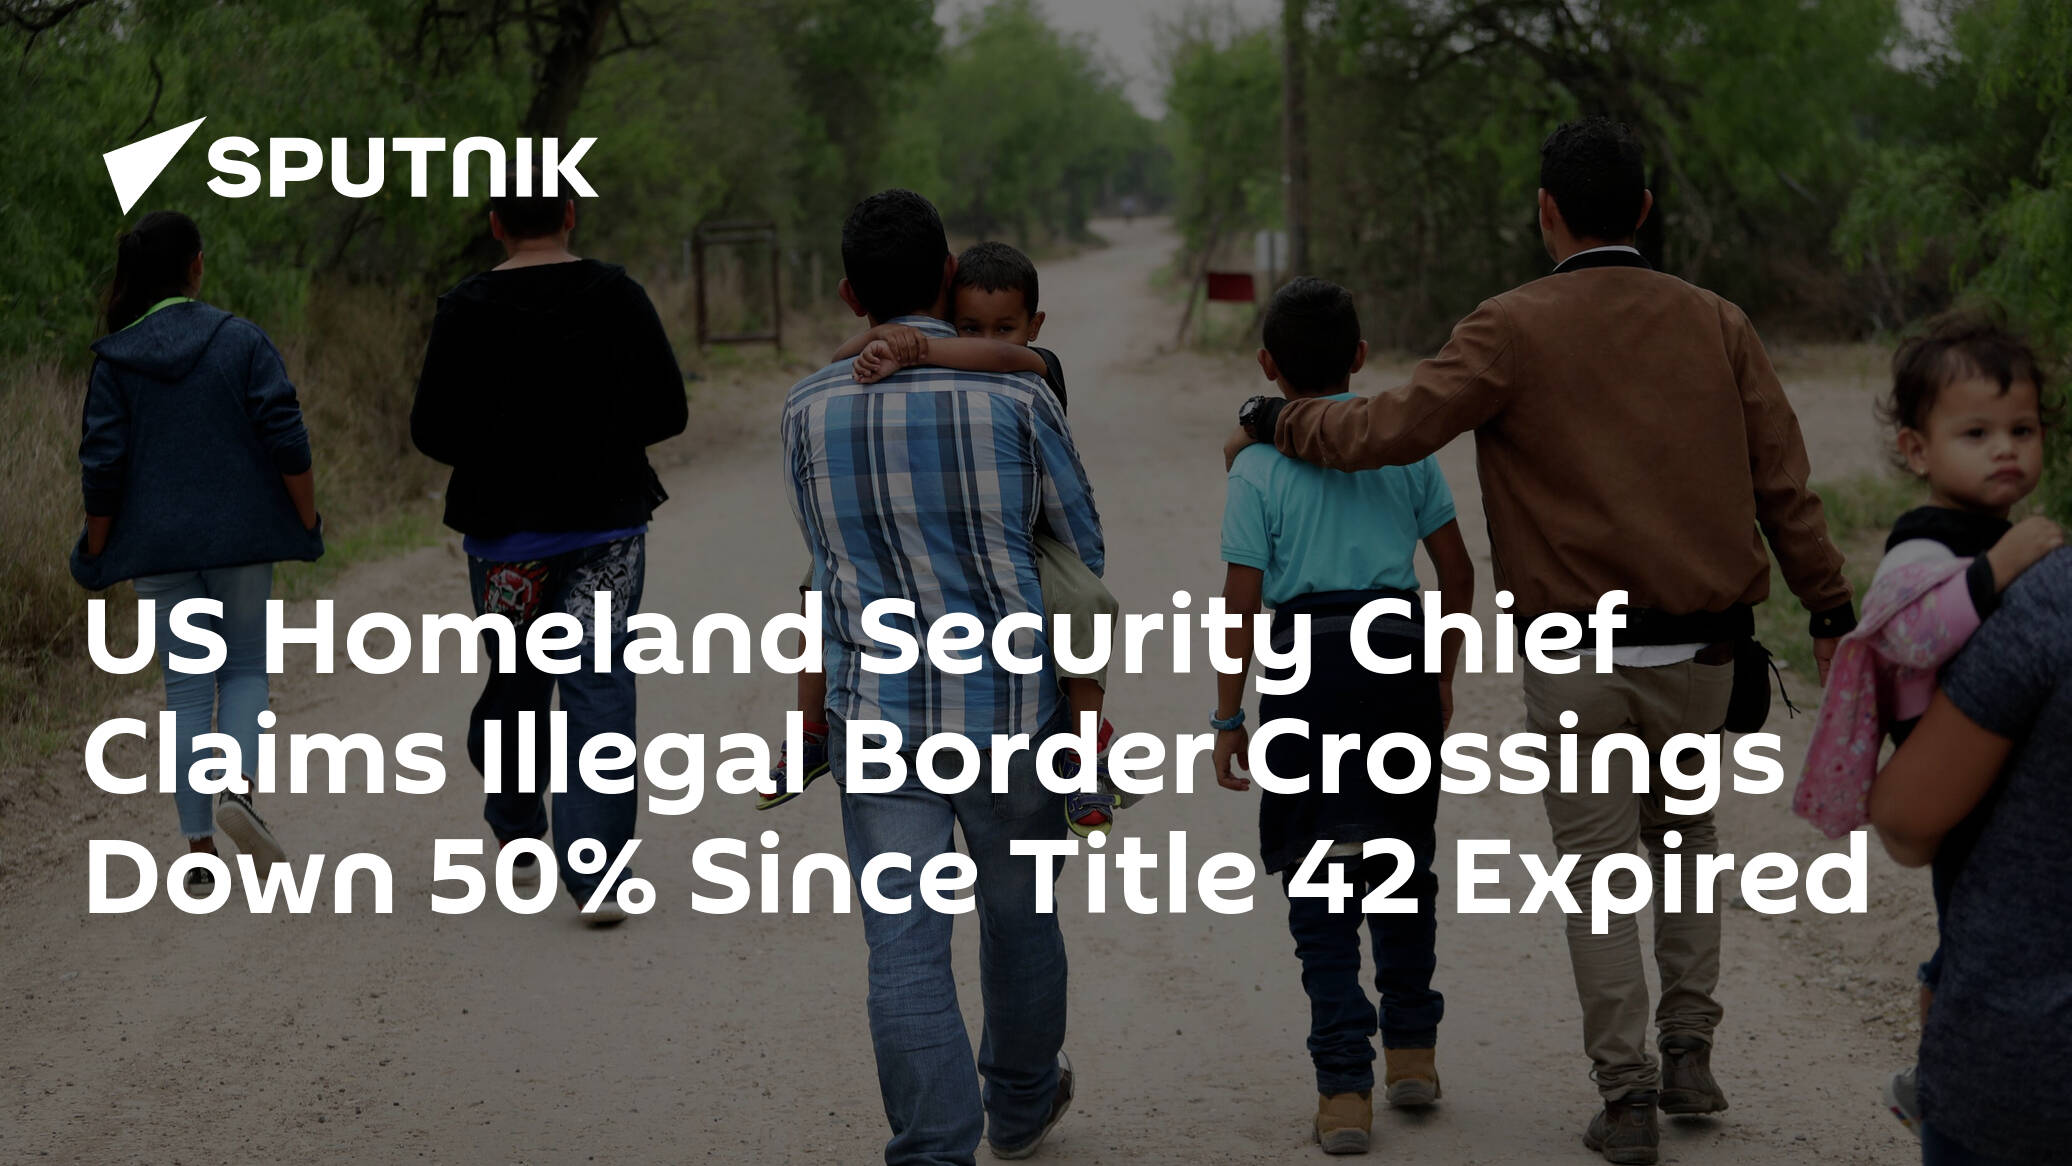 US Homeland Security Chief Claims Illegal Border Crossings Down 50% Since Title 42 Expired